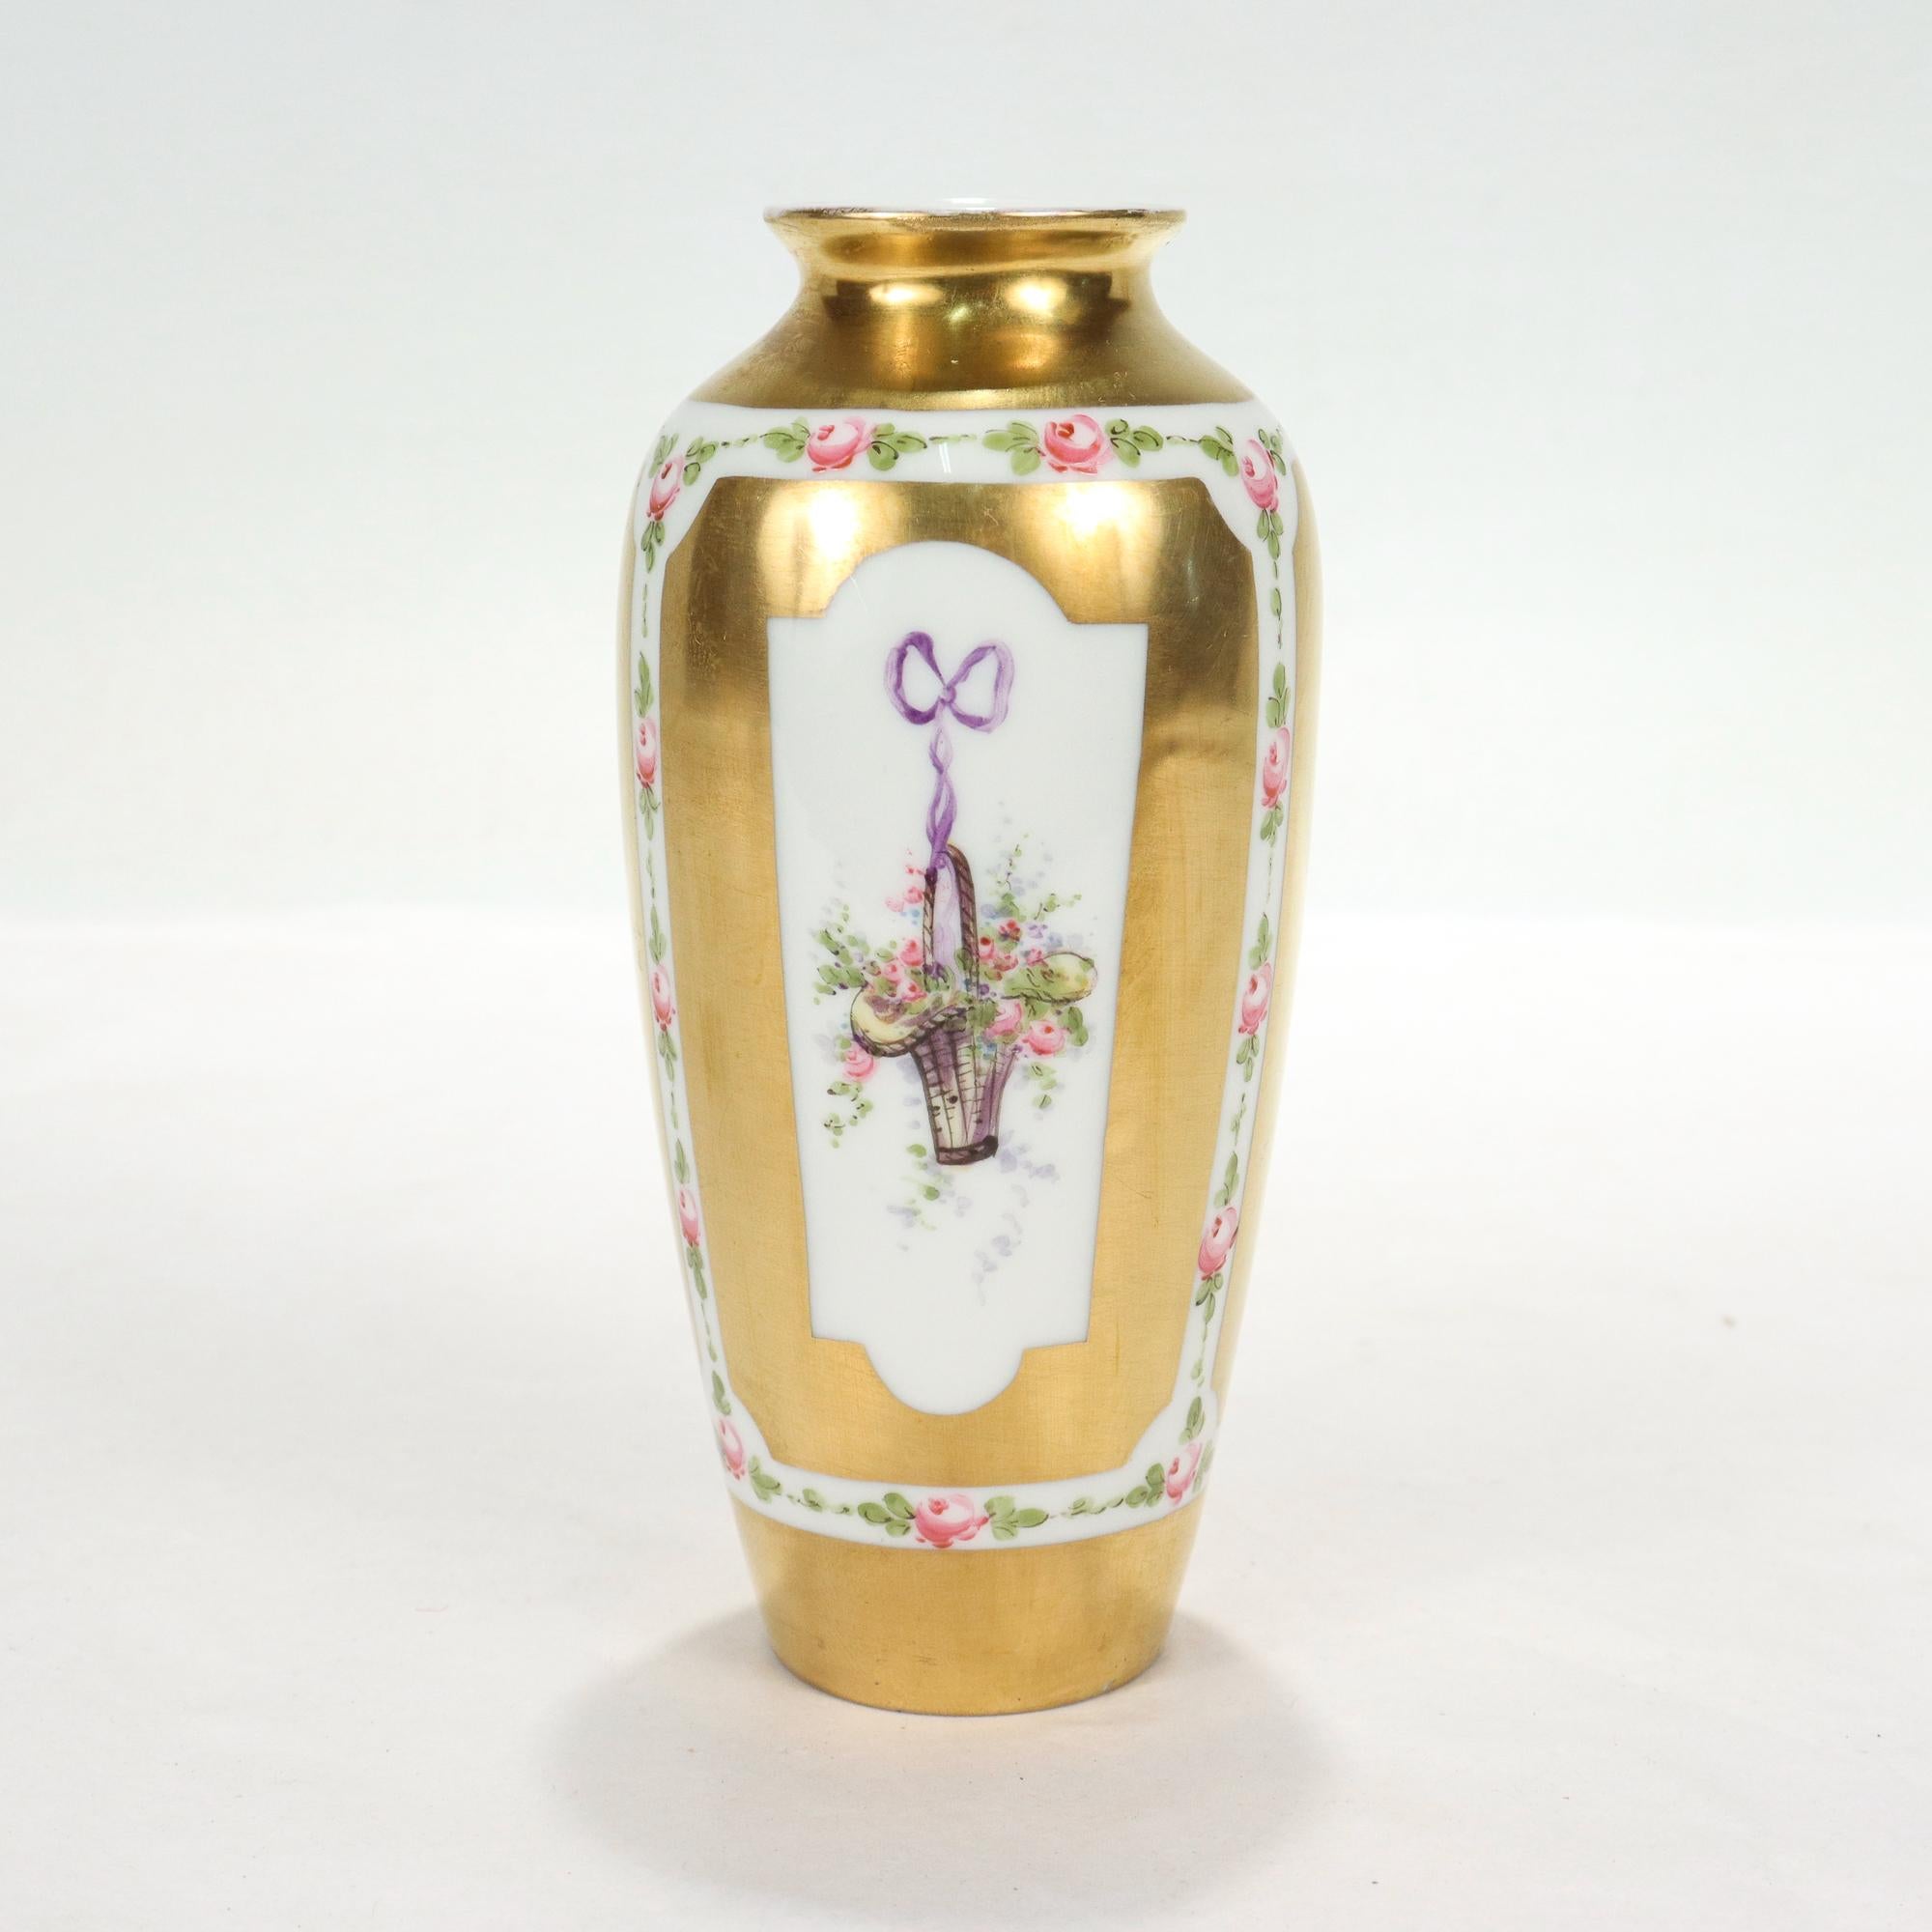 A fine old or antique Sevres type porcelain vase.

With rich gilding and handpainted flower baskets & ribbons throughout. 

Marked to the based with a blue Sevres type interlaced 